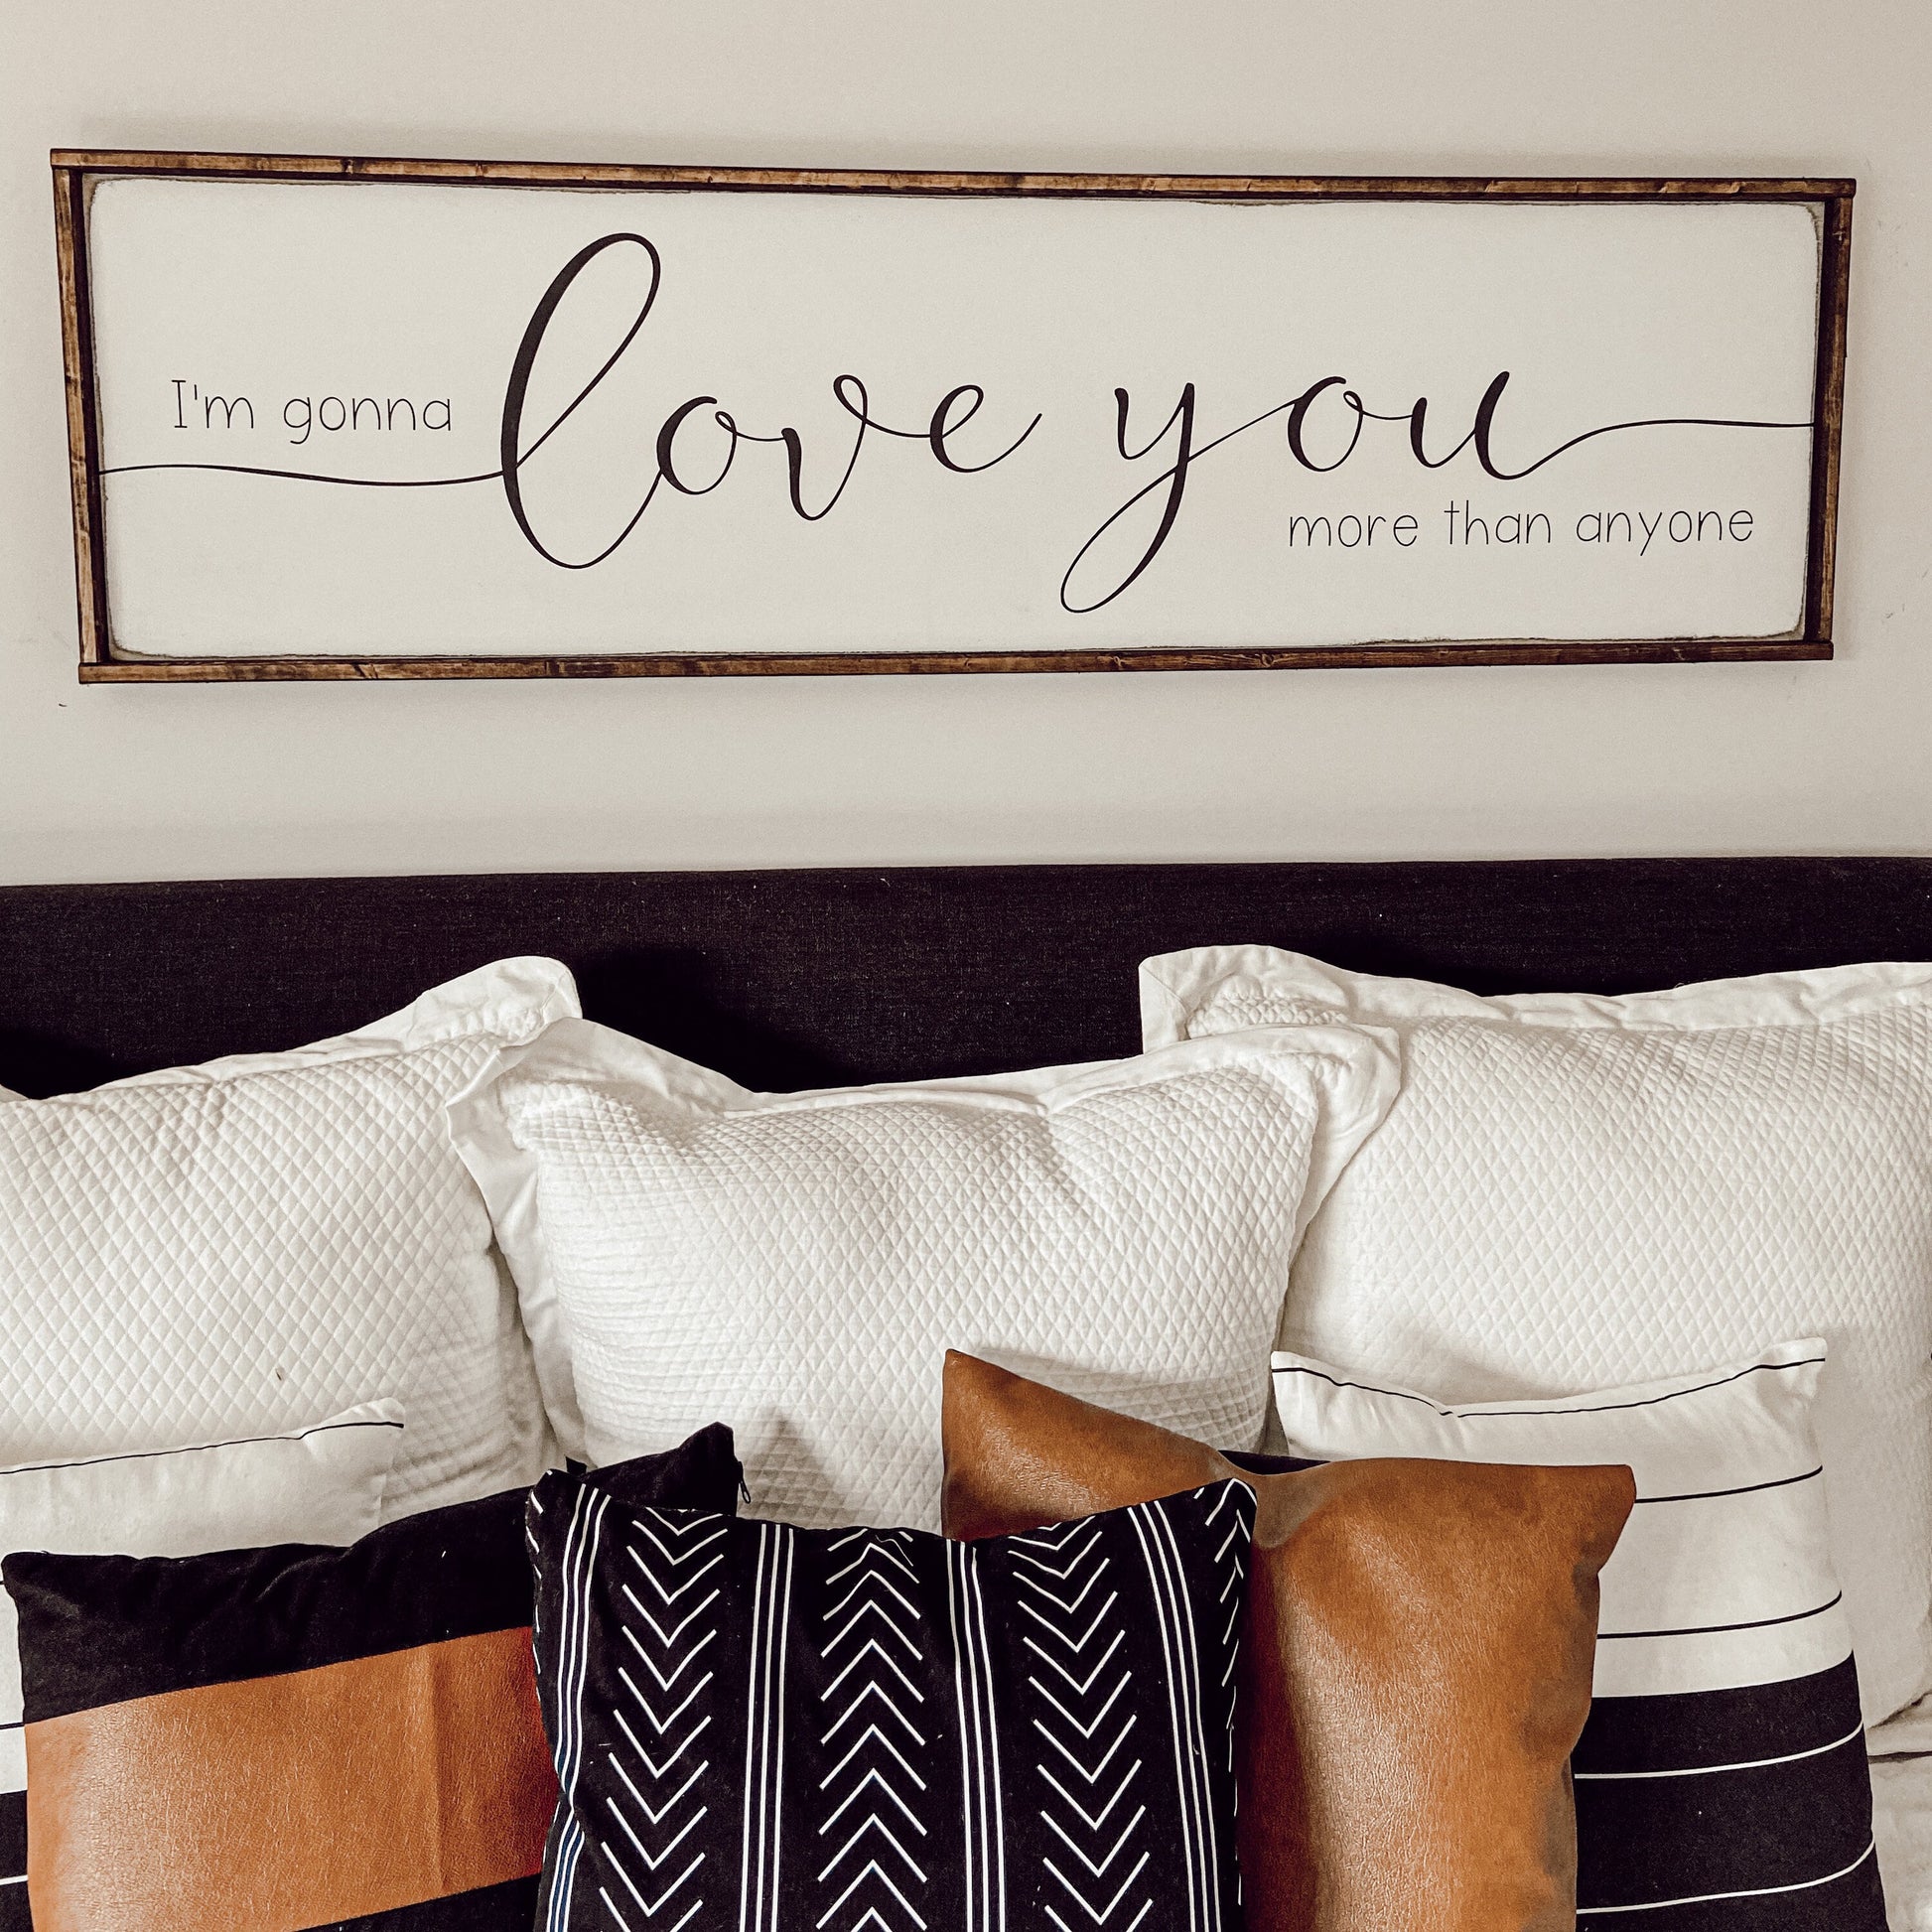 i’m gonna love you more than anyone - above & over the bed sign [FREE SHIPPING!]